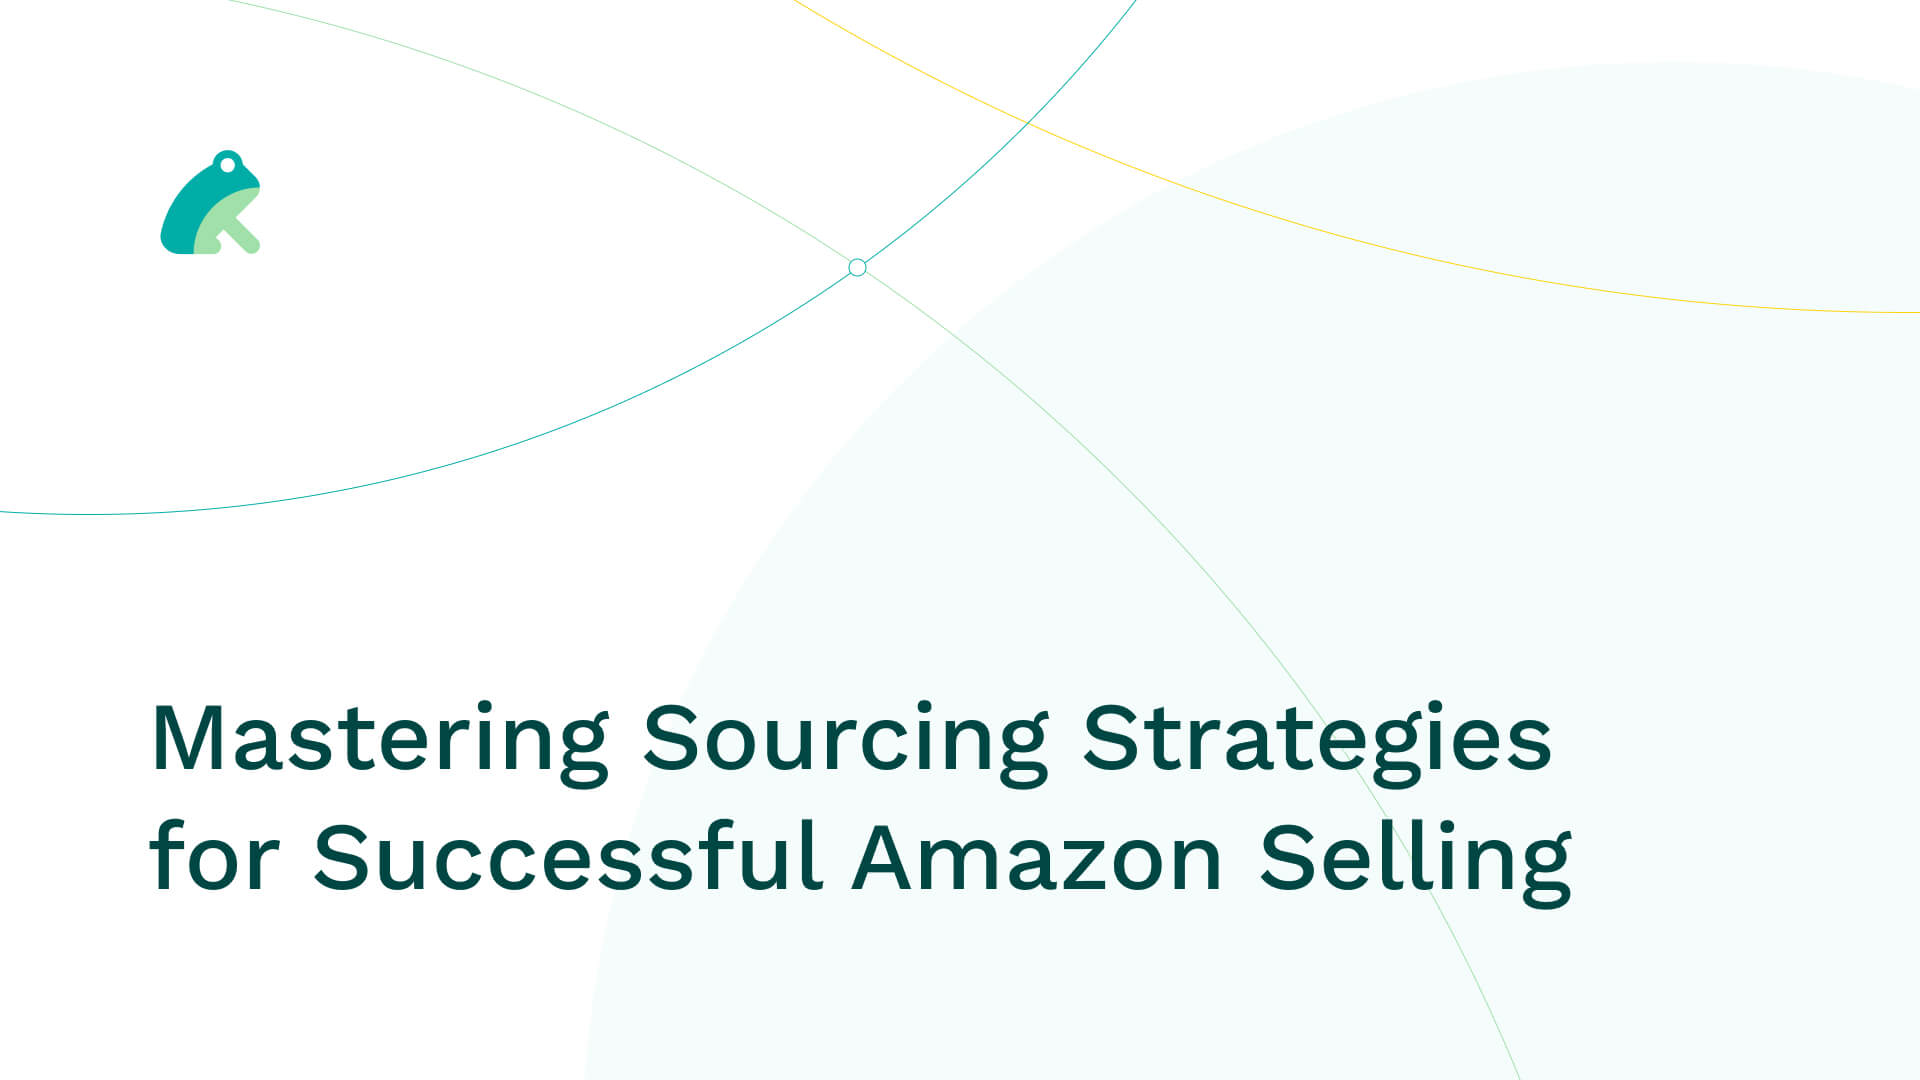 Mastering Sourcing Strategies for Successful Amazon Selling